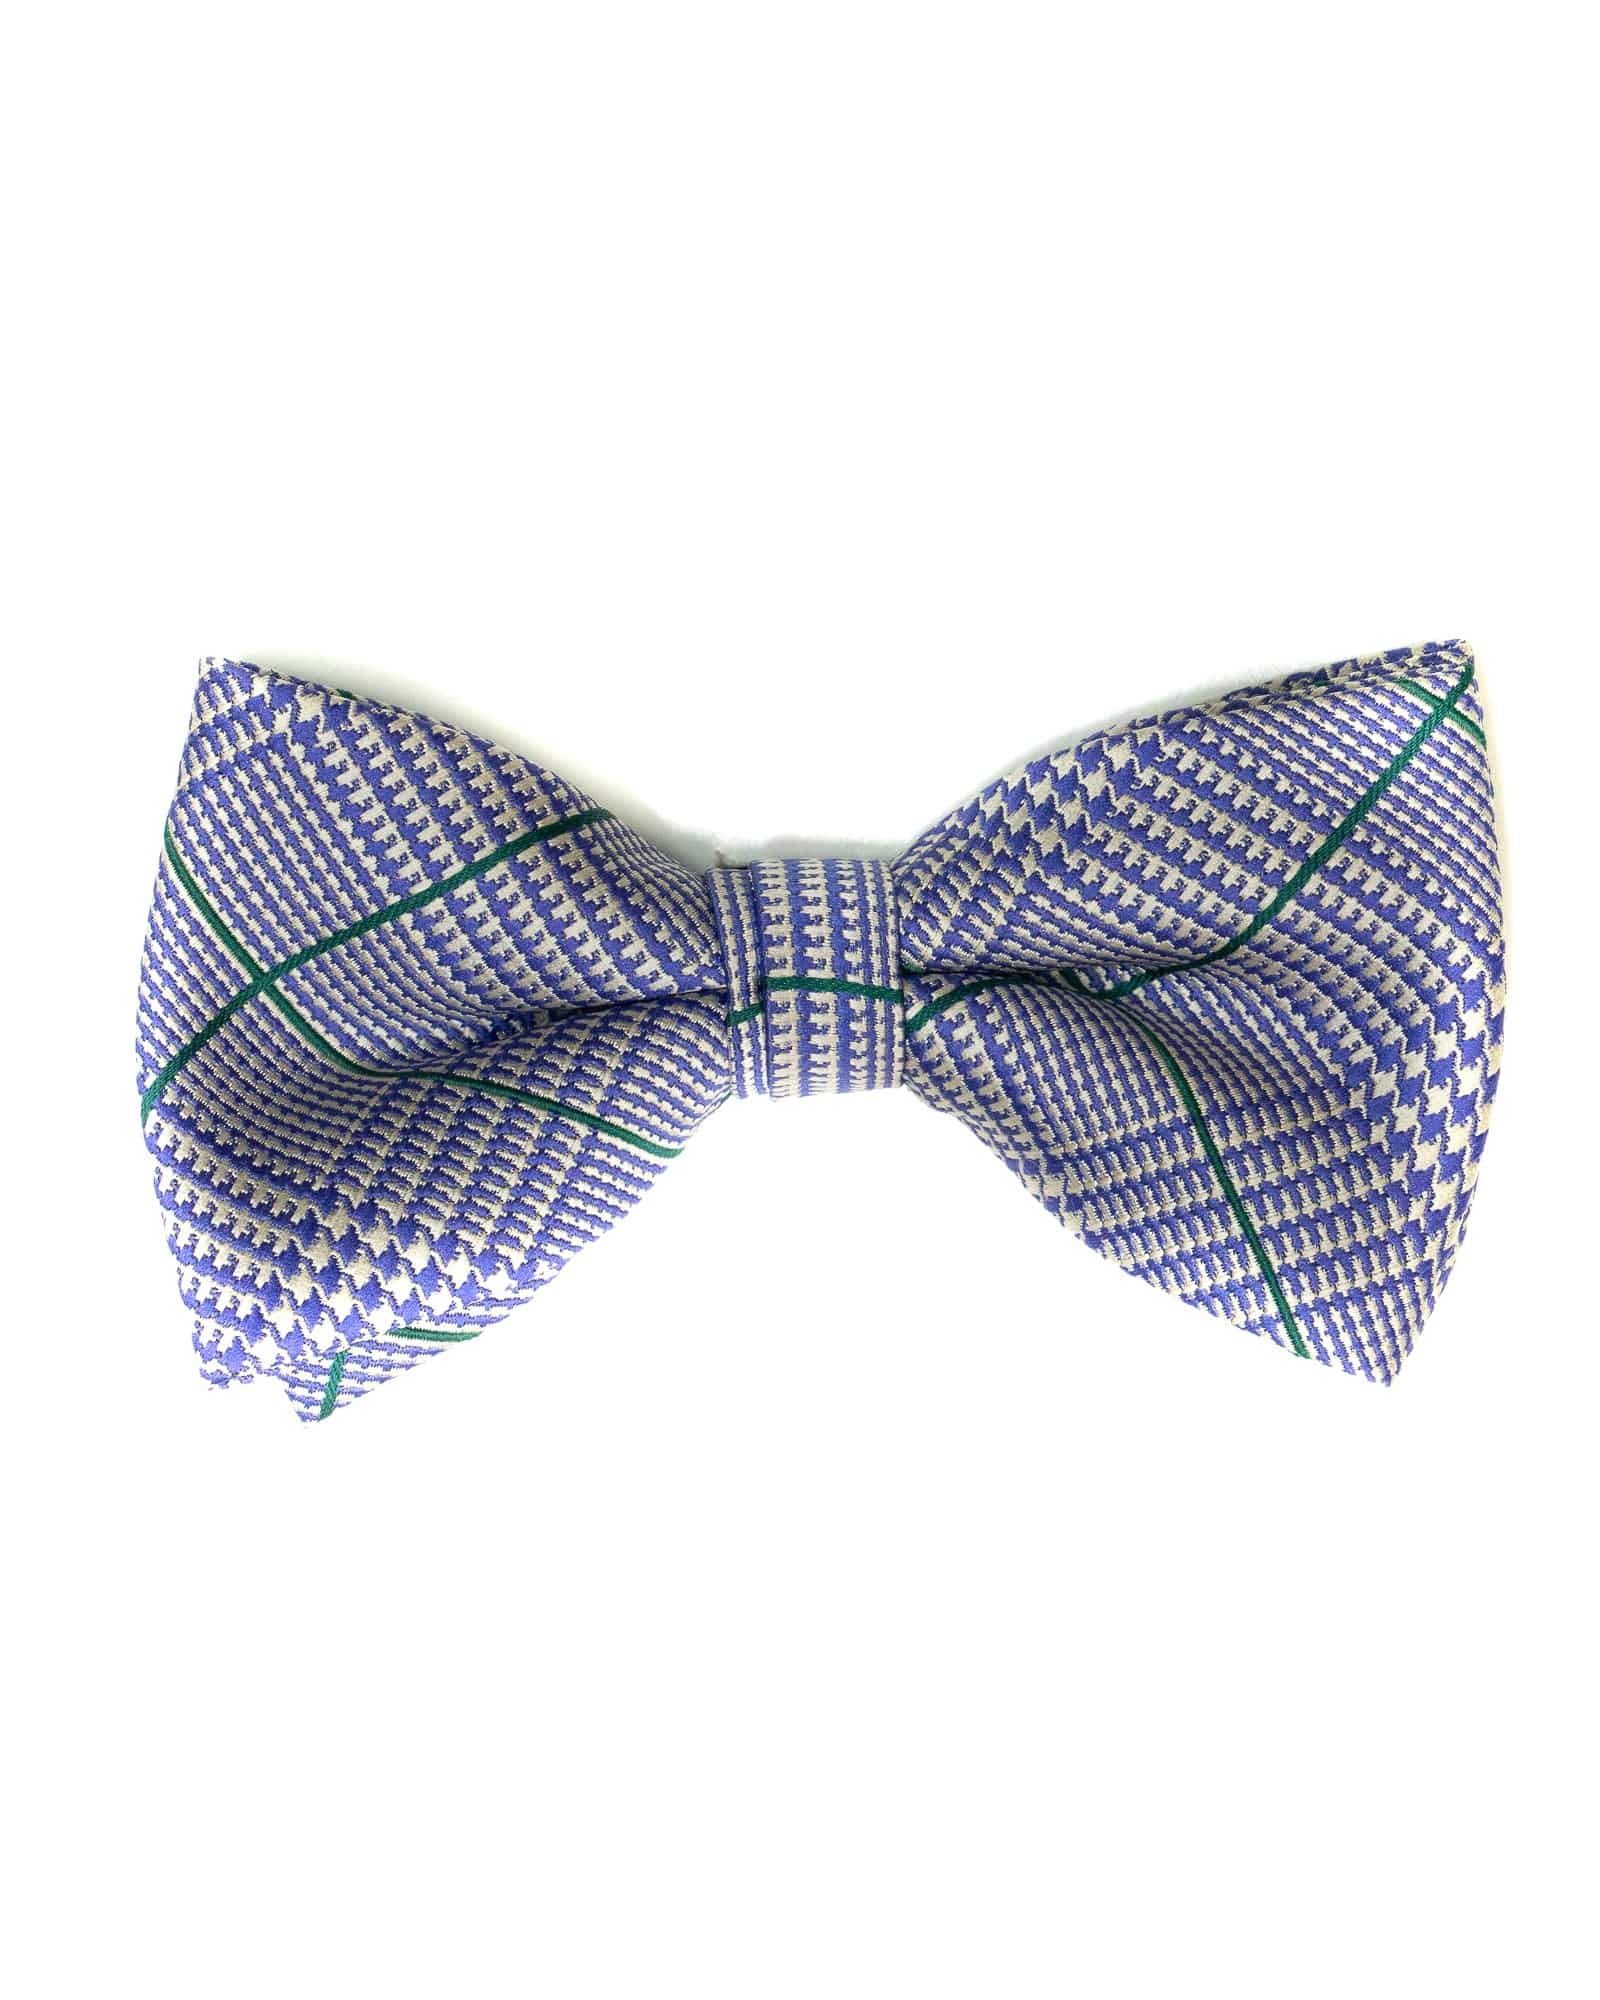 Bow Tie In Plaid Pattern Purple & Grey - Rainwater's Men's Clothing and Tuxedo Rental